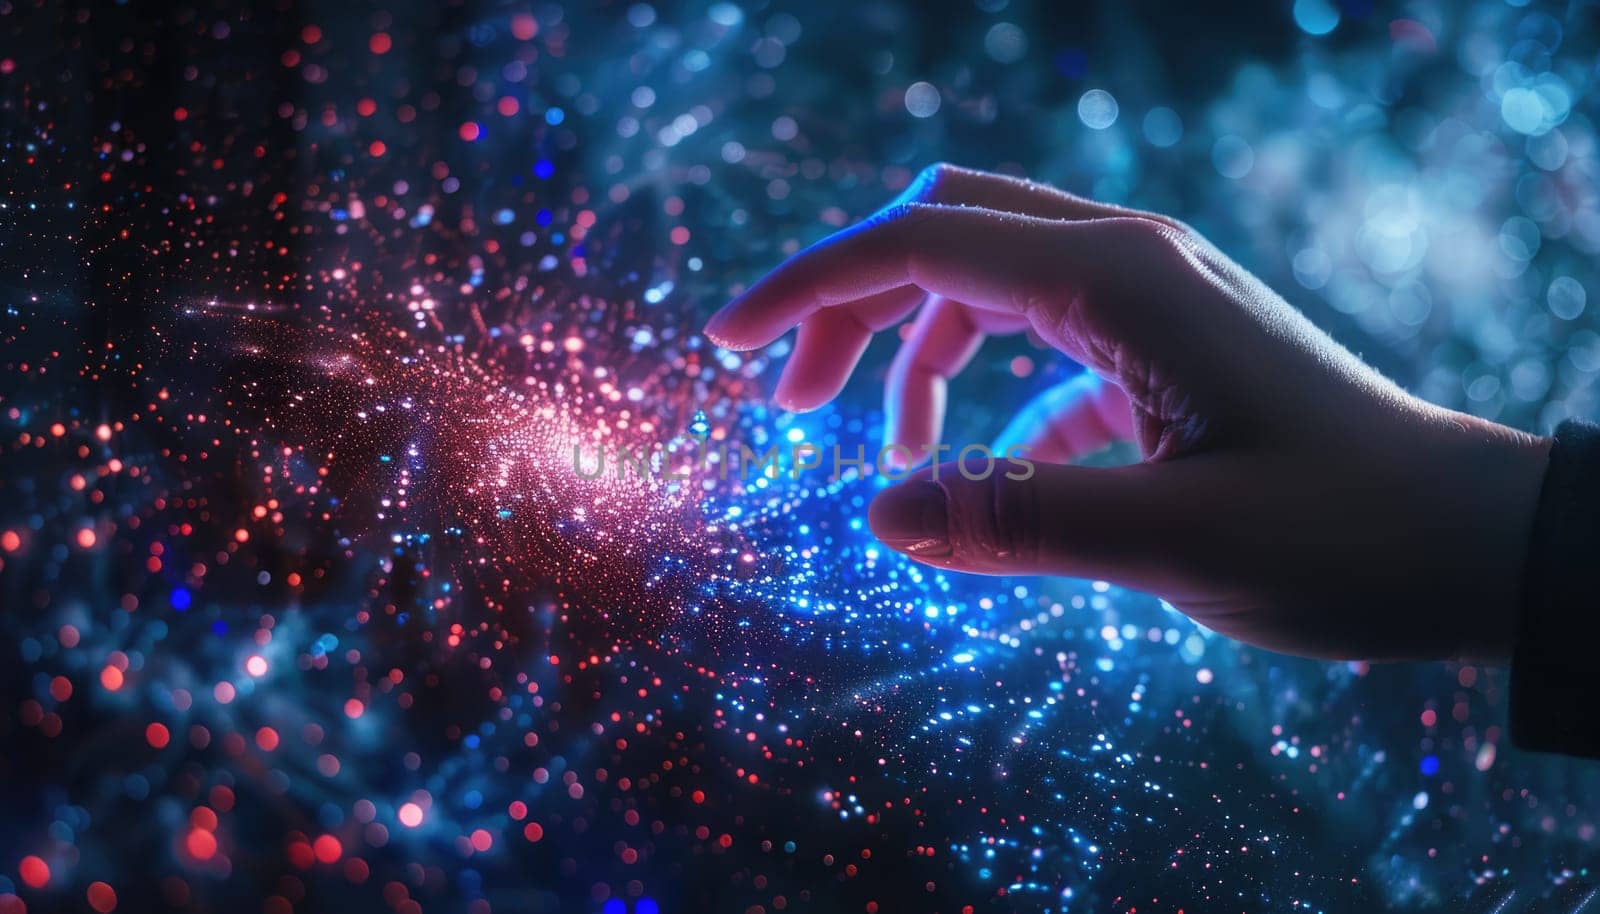 A hand is reaching out into a galaxy of stars by AI generated image.